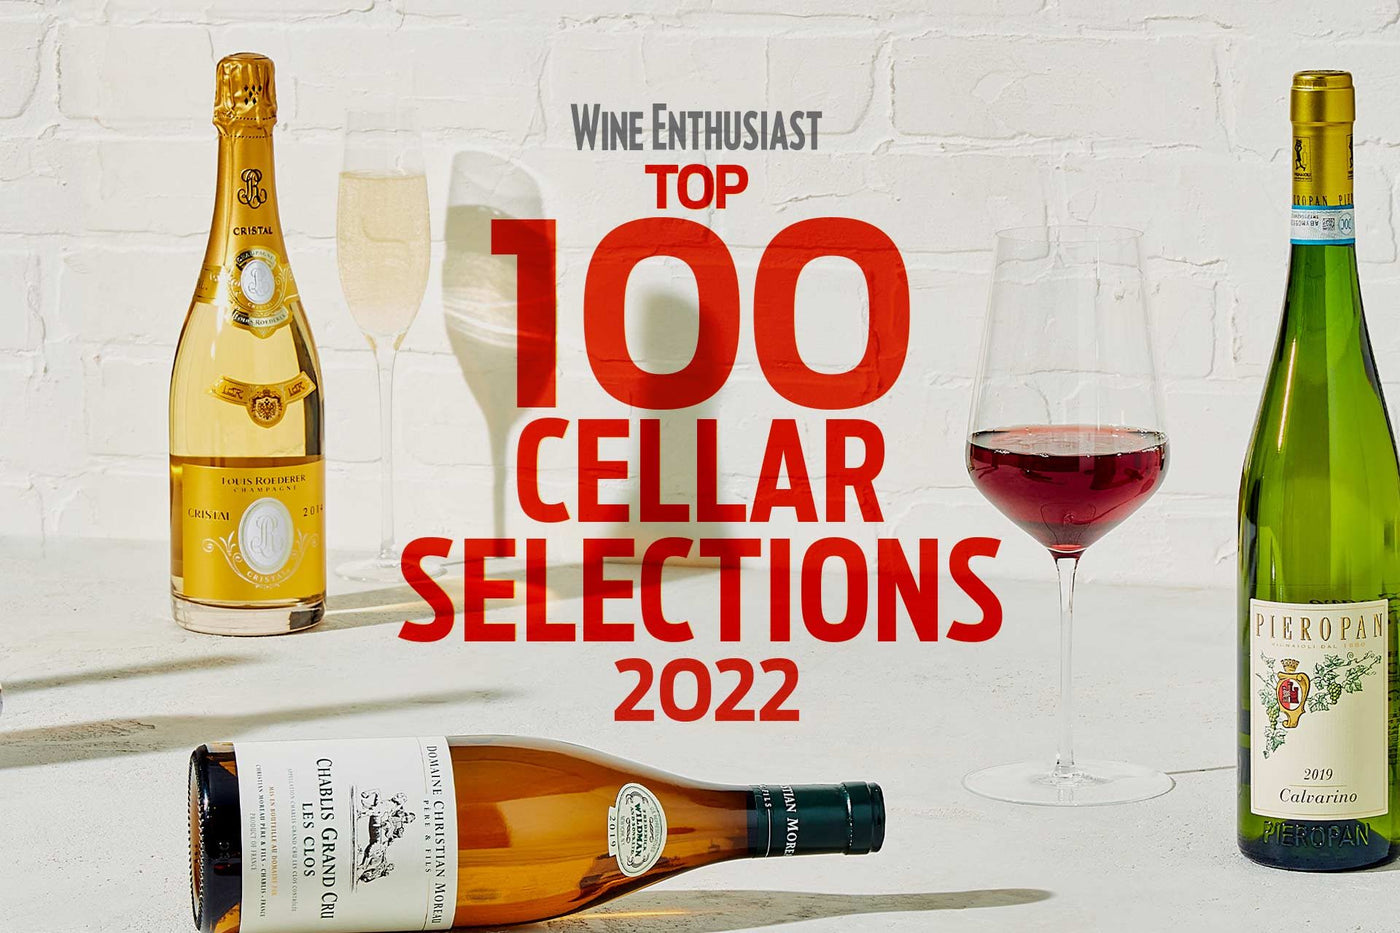 Wine Enthusiast Top 100 Cellar Selections of 2022